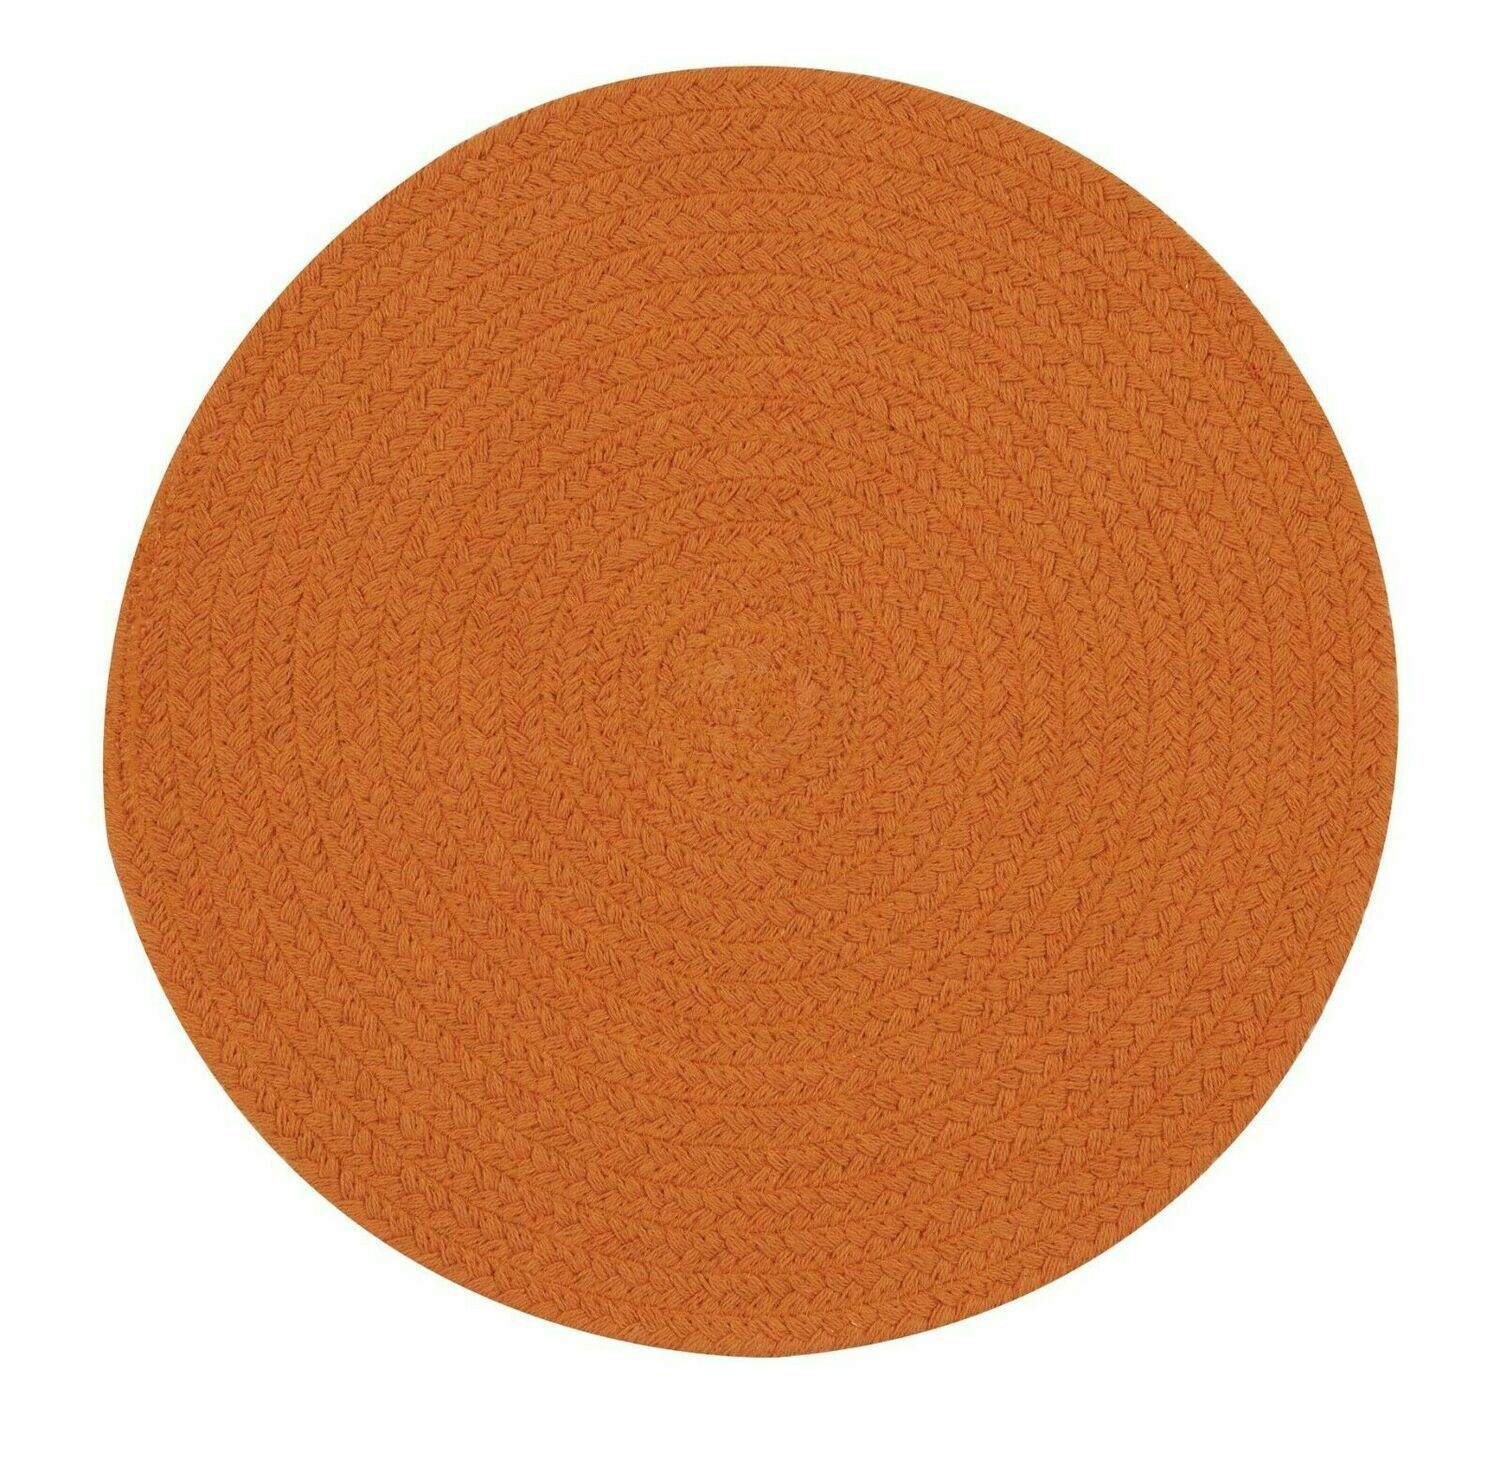 Homewear Harvest Collection Cotton Round Placemats